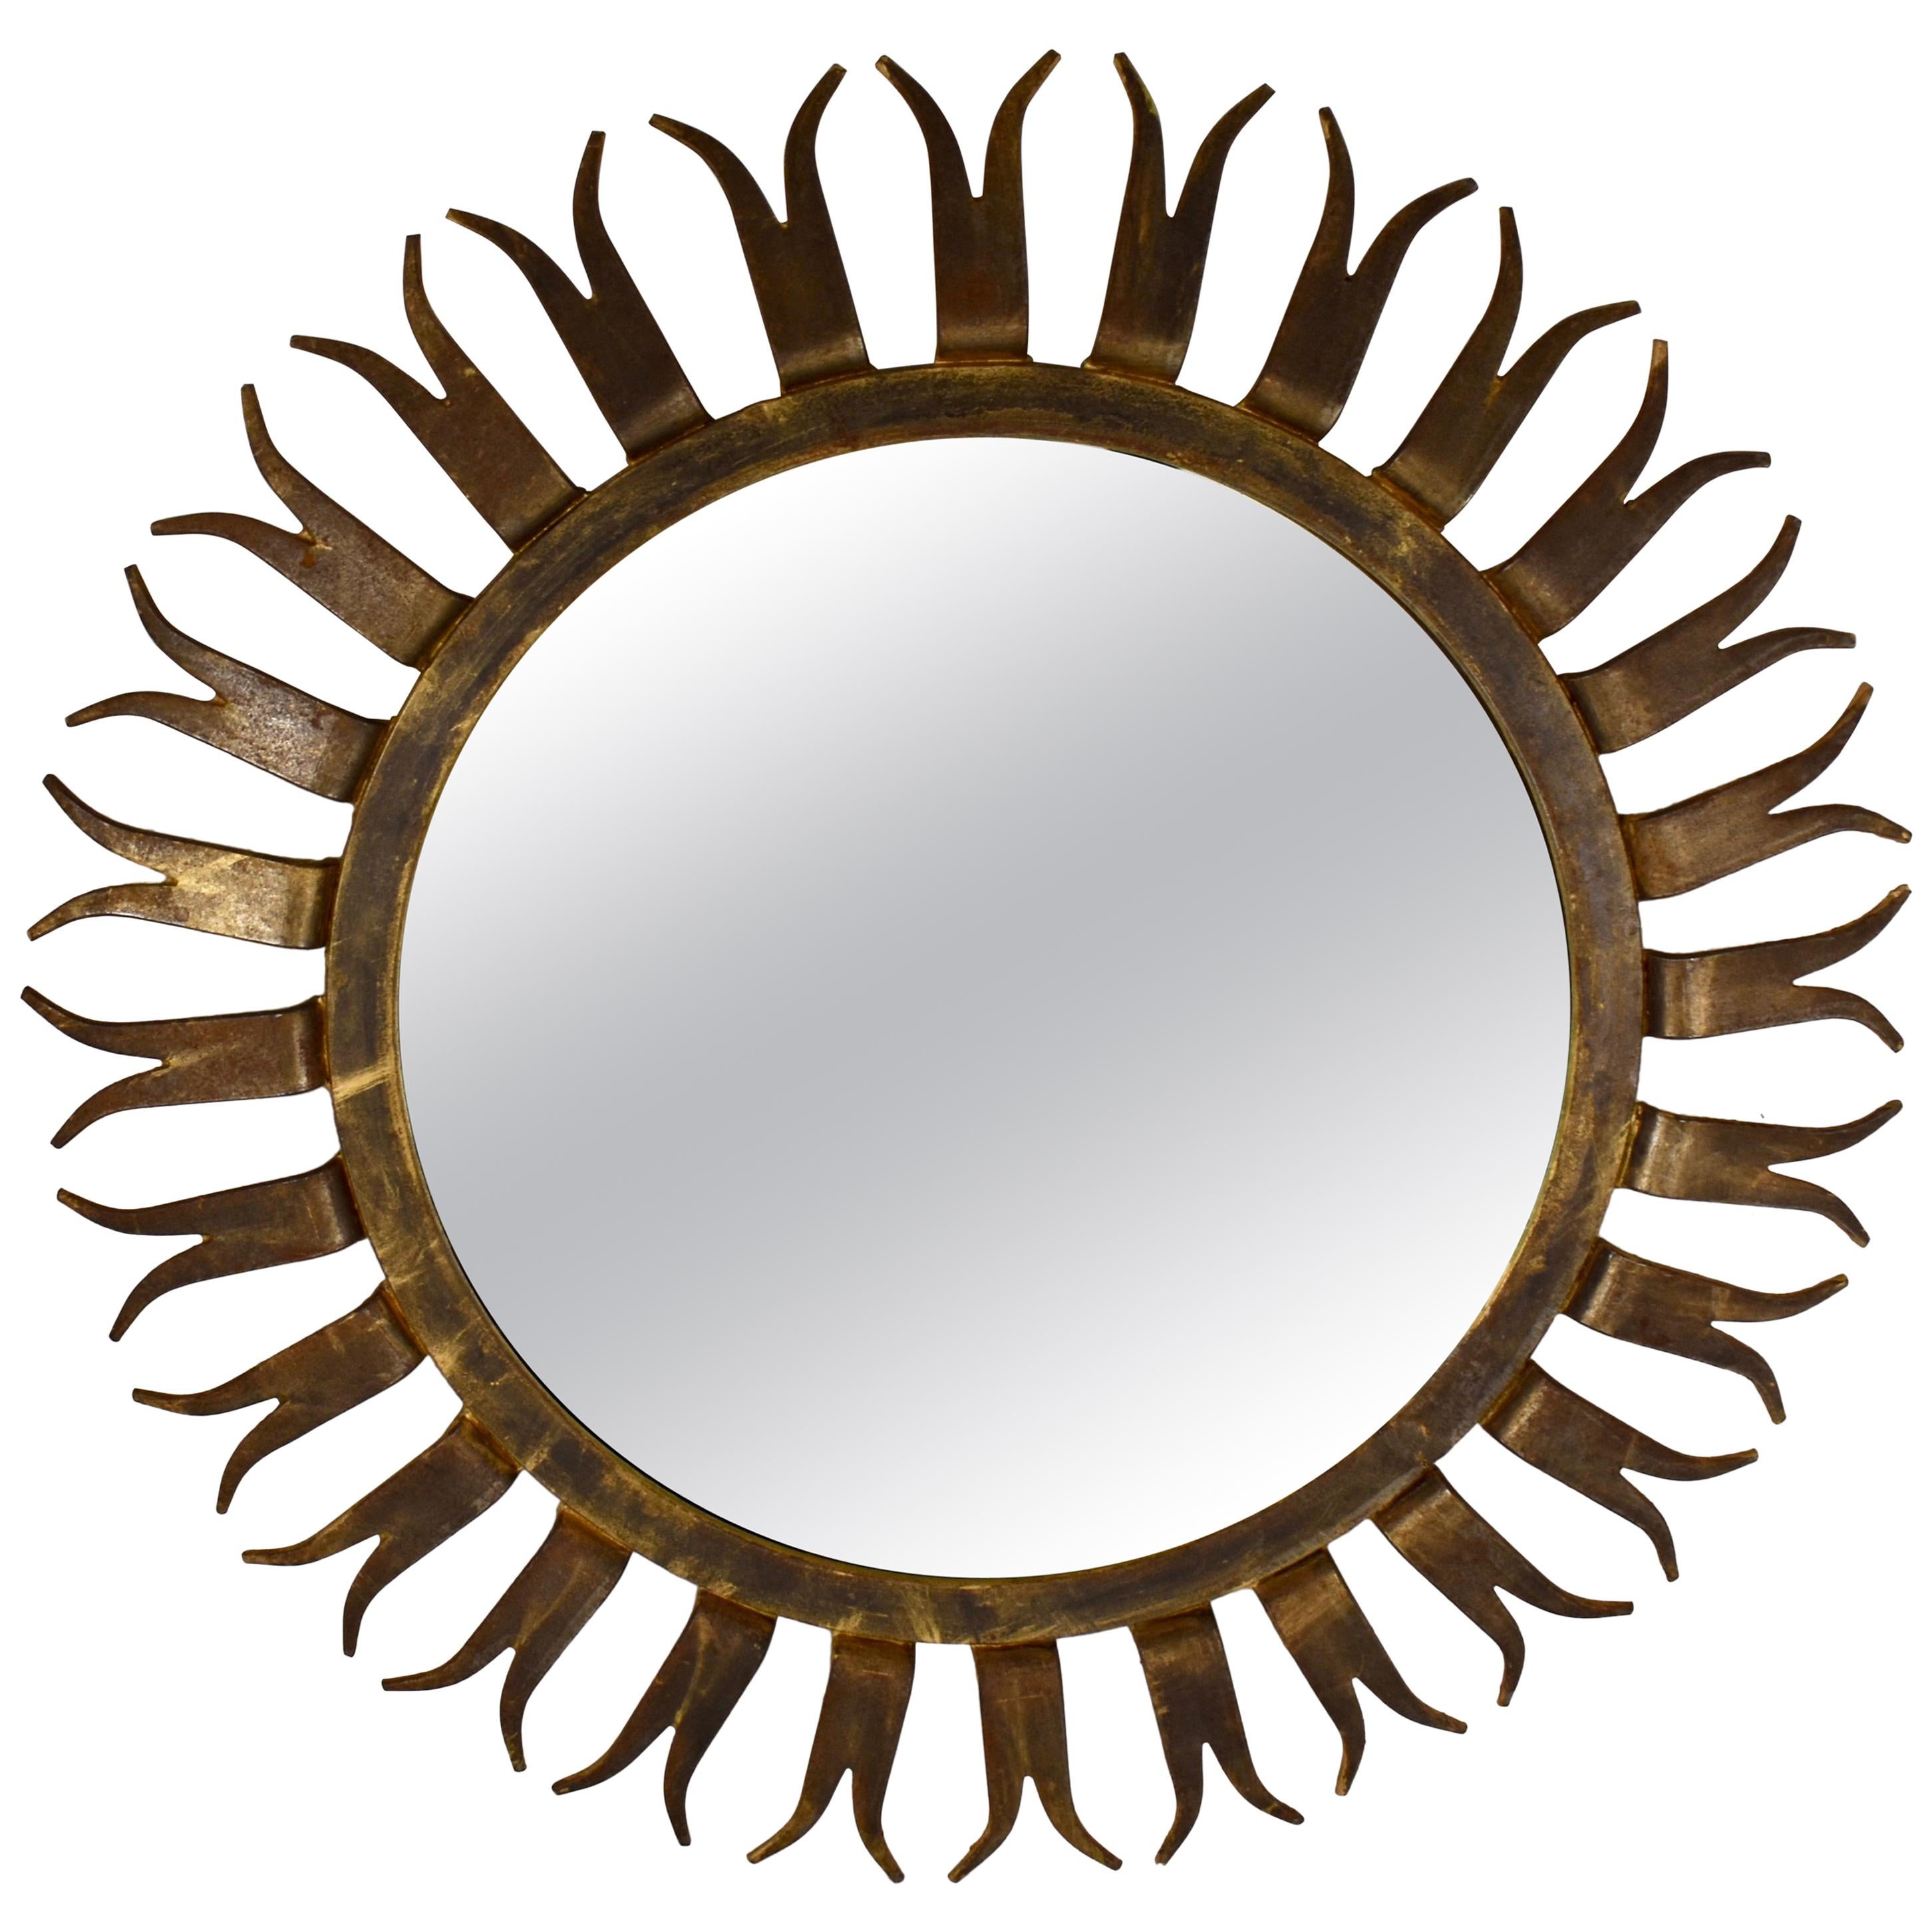 French Midcentury Gilded Wrought Iron Forked Ray Sunburst Wall Mirror